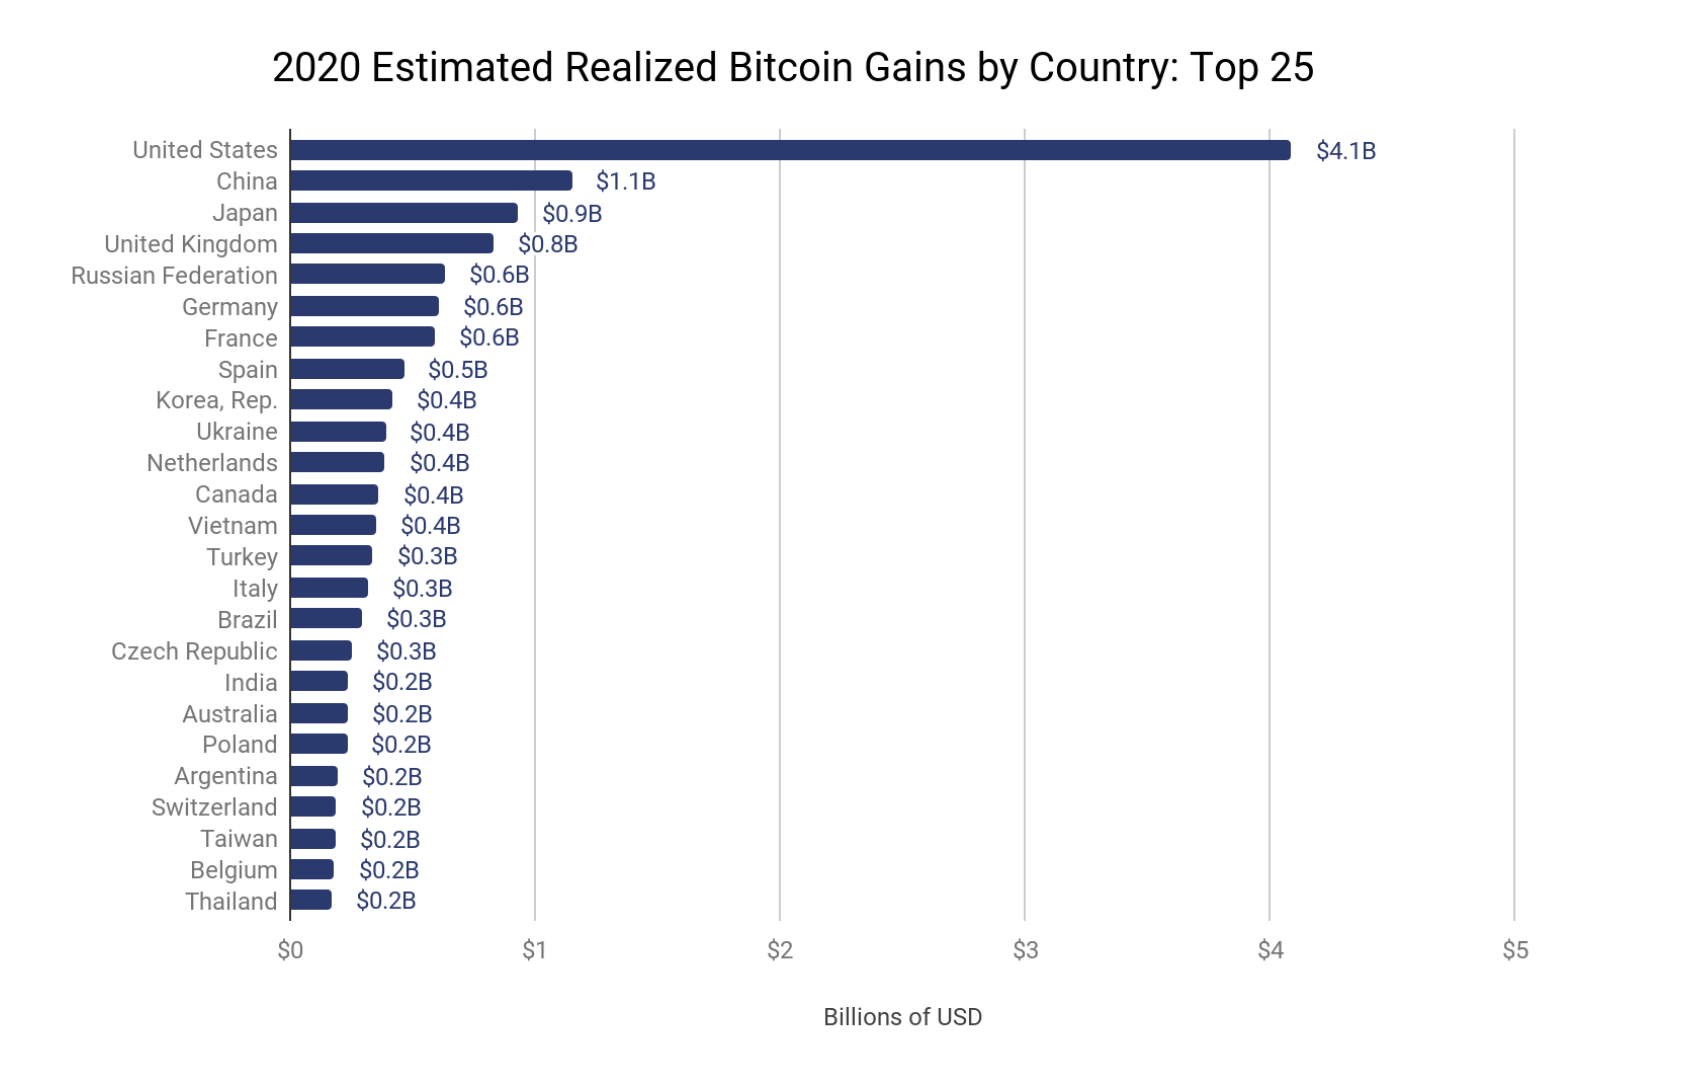 Estimated realized bitcoin gains by country for 2020